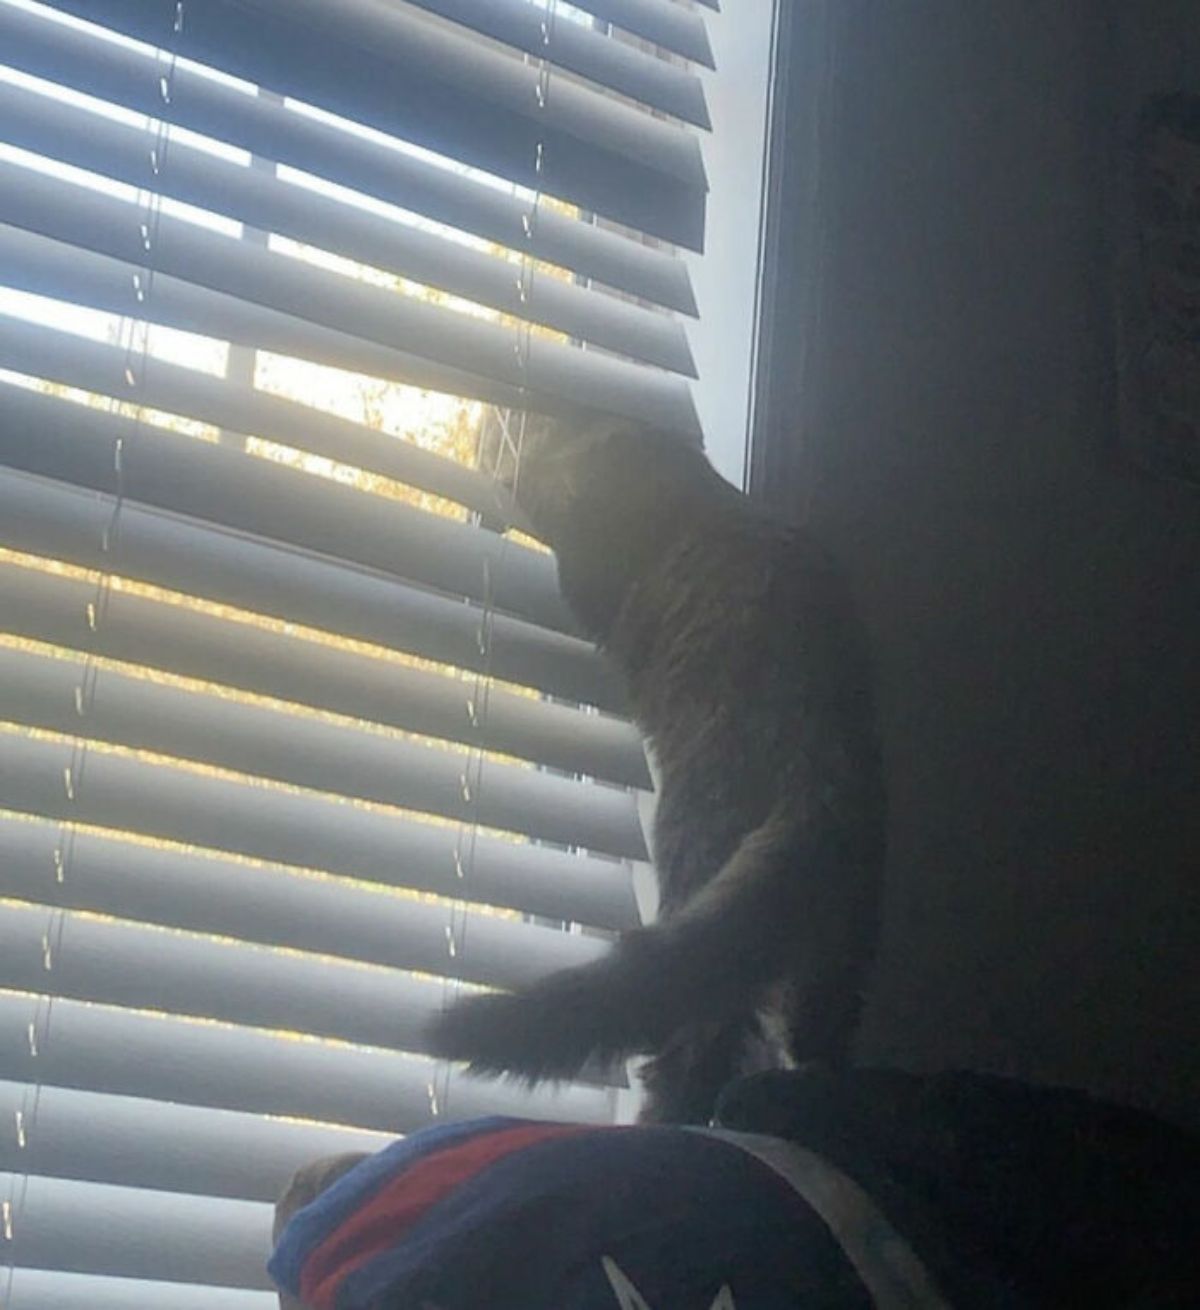 brown and black cat standing on hind legs with the head through a gap in the blinds